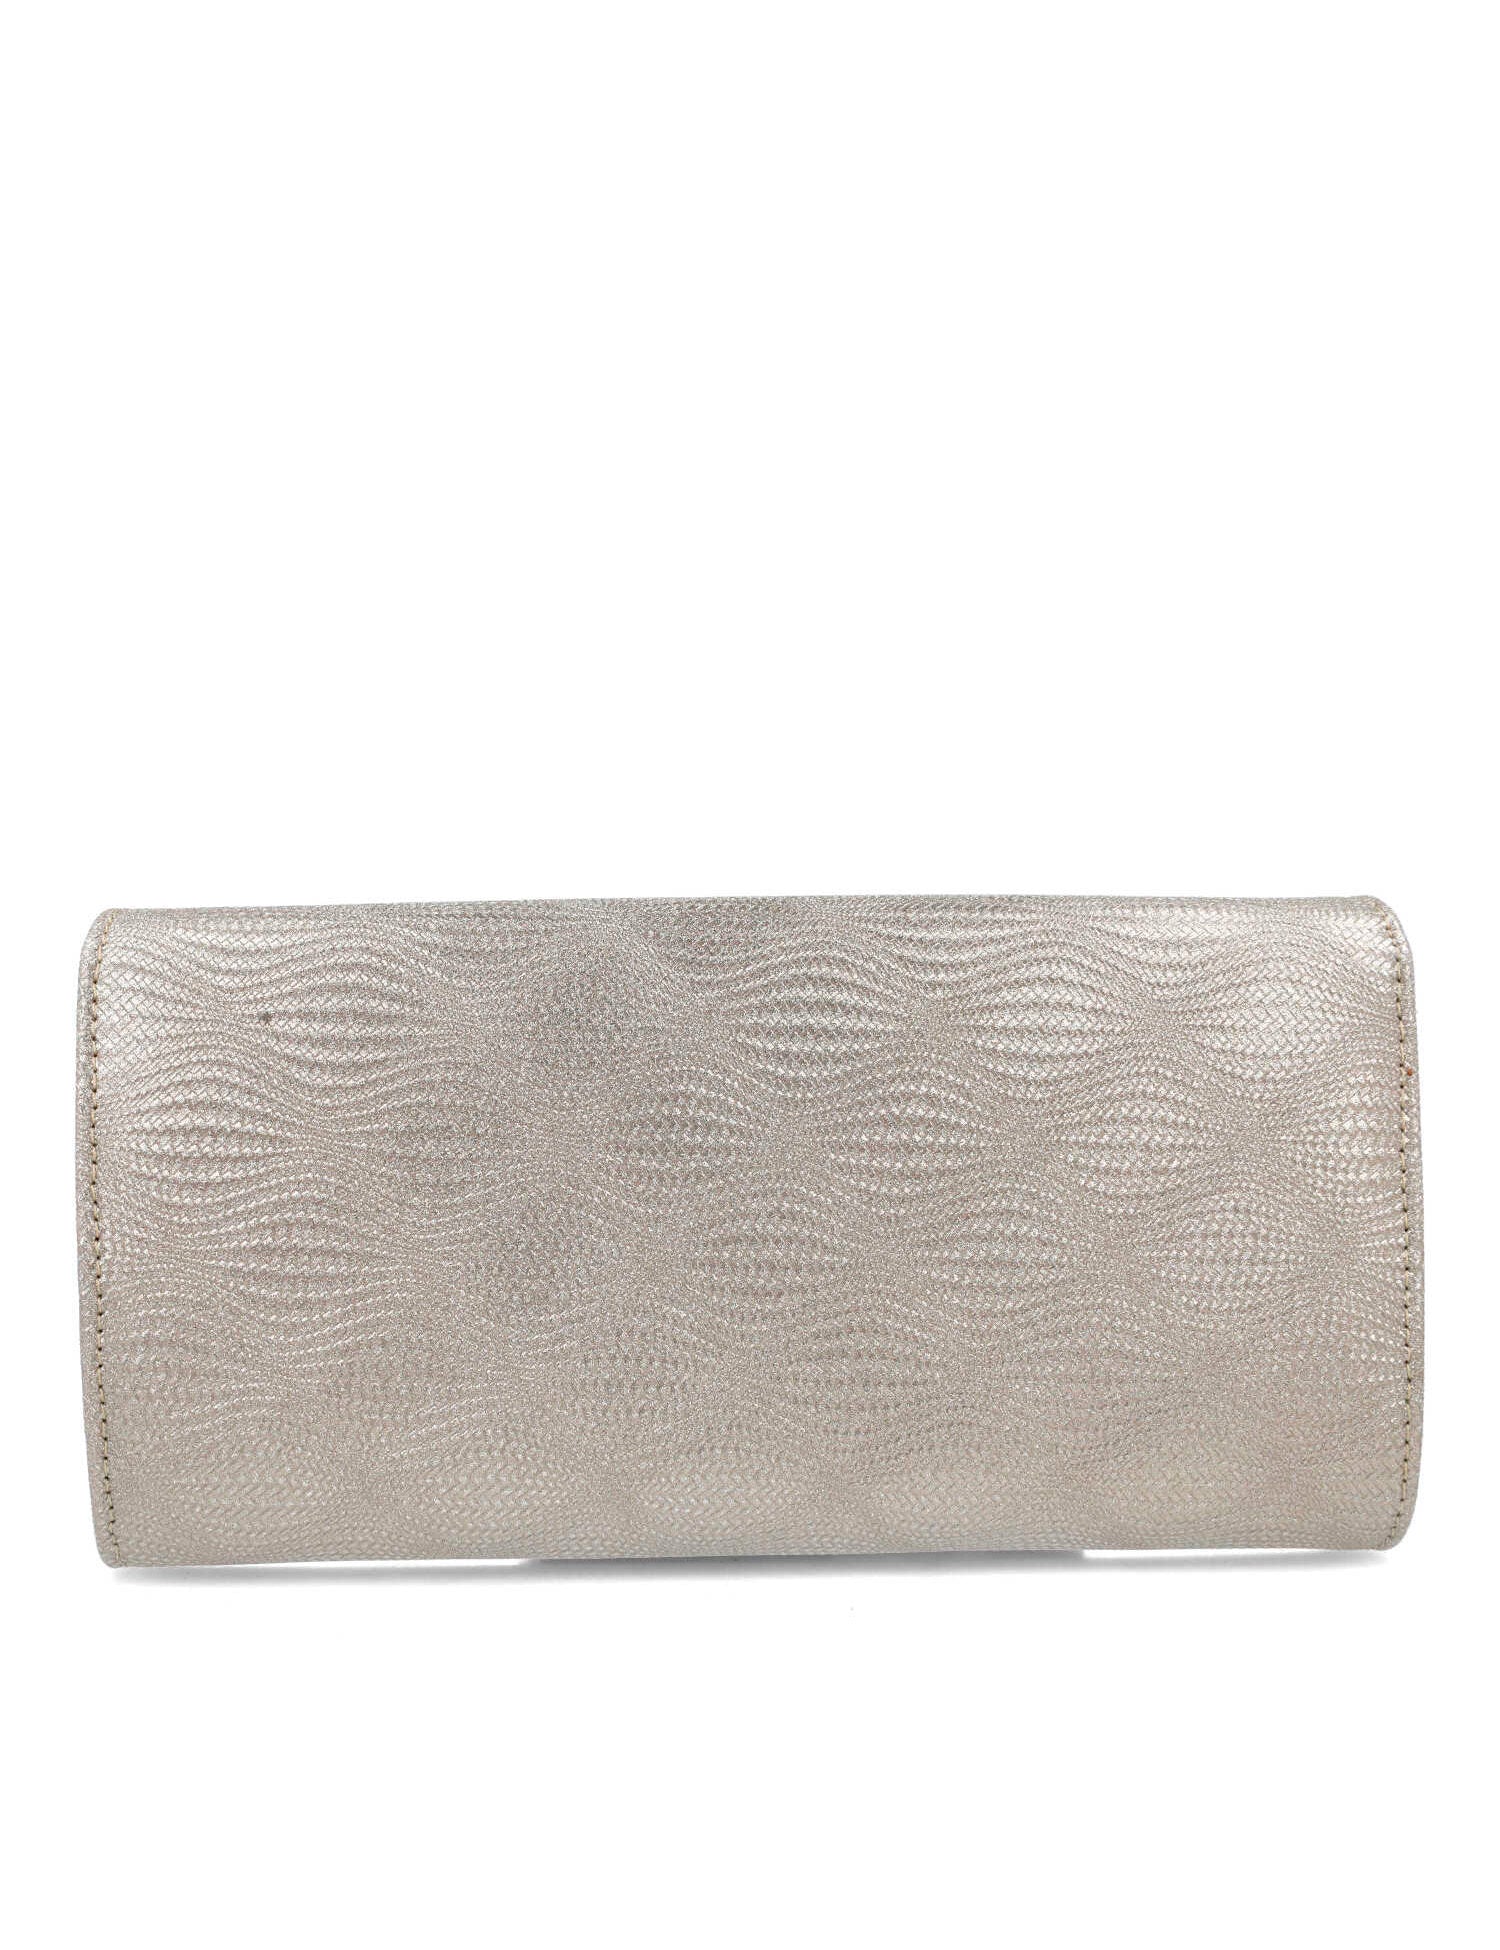 Beige Clutch With Gold Hardware_85642_00_03